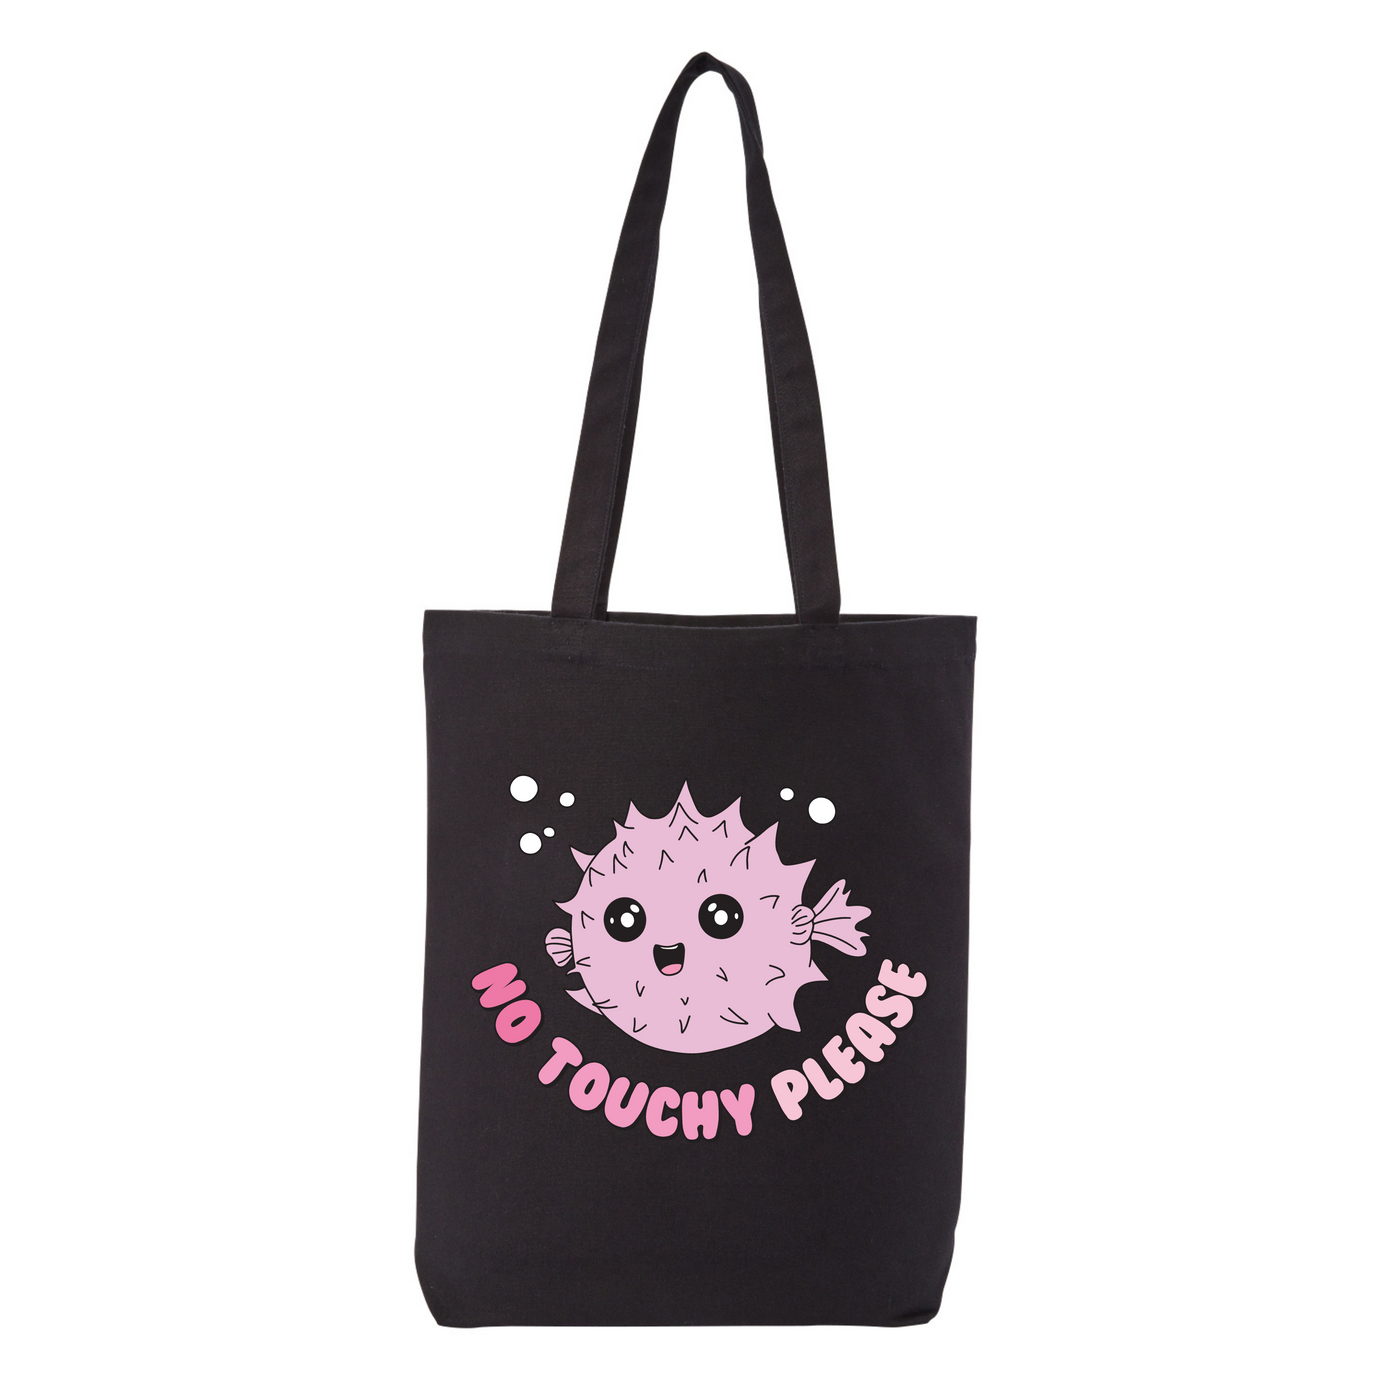 "No Touchy Please" Tote Bag